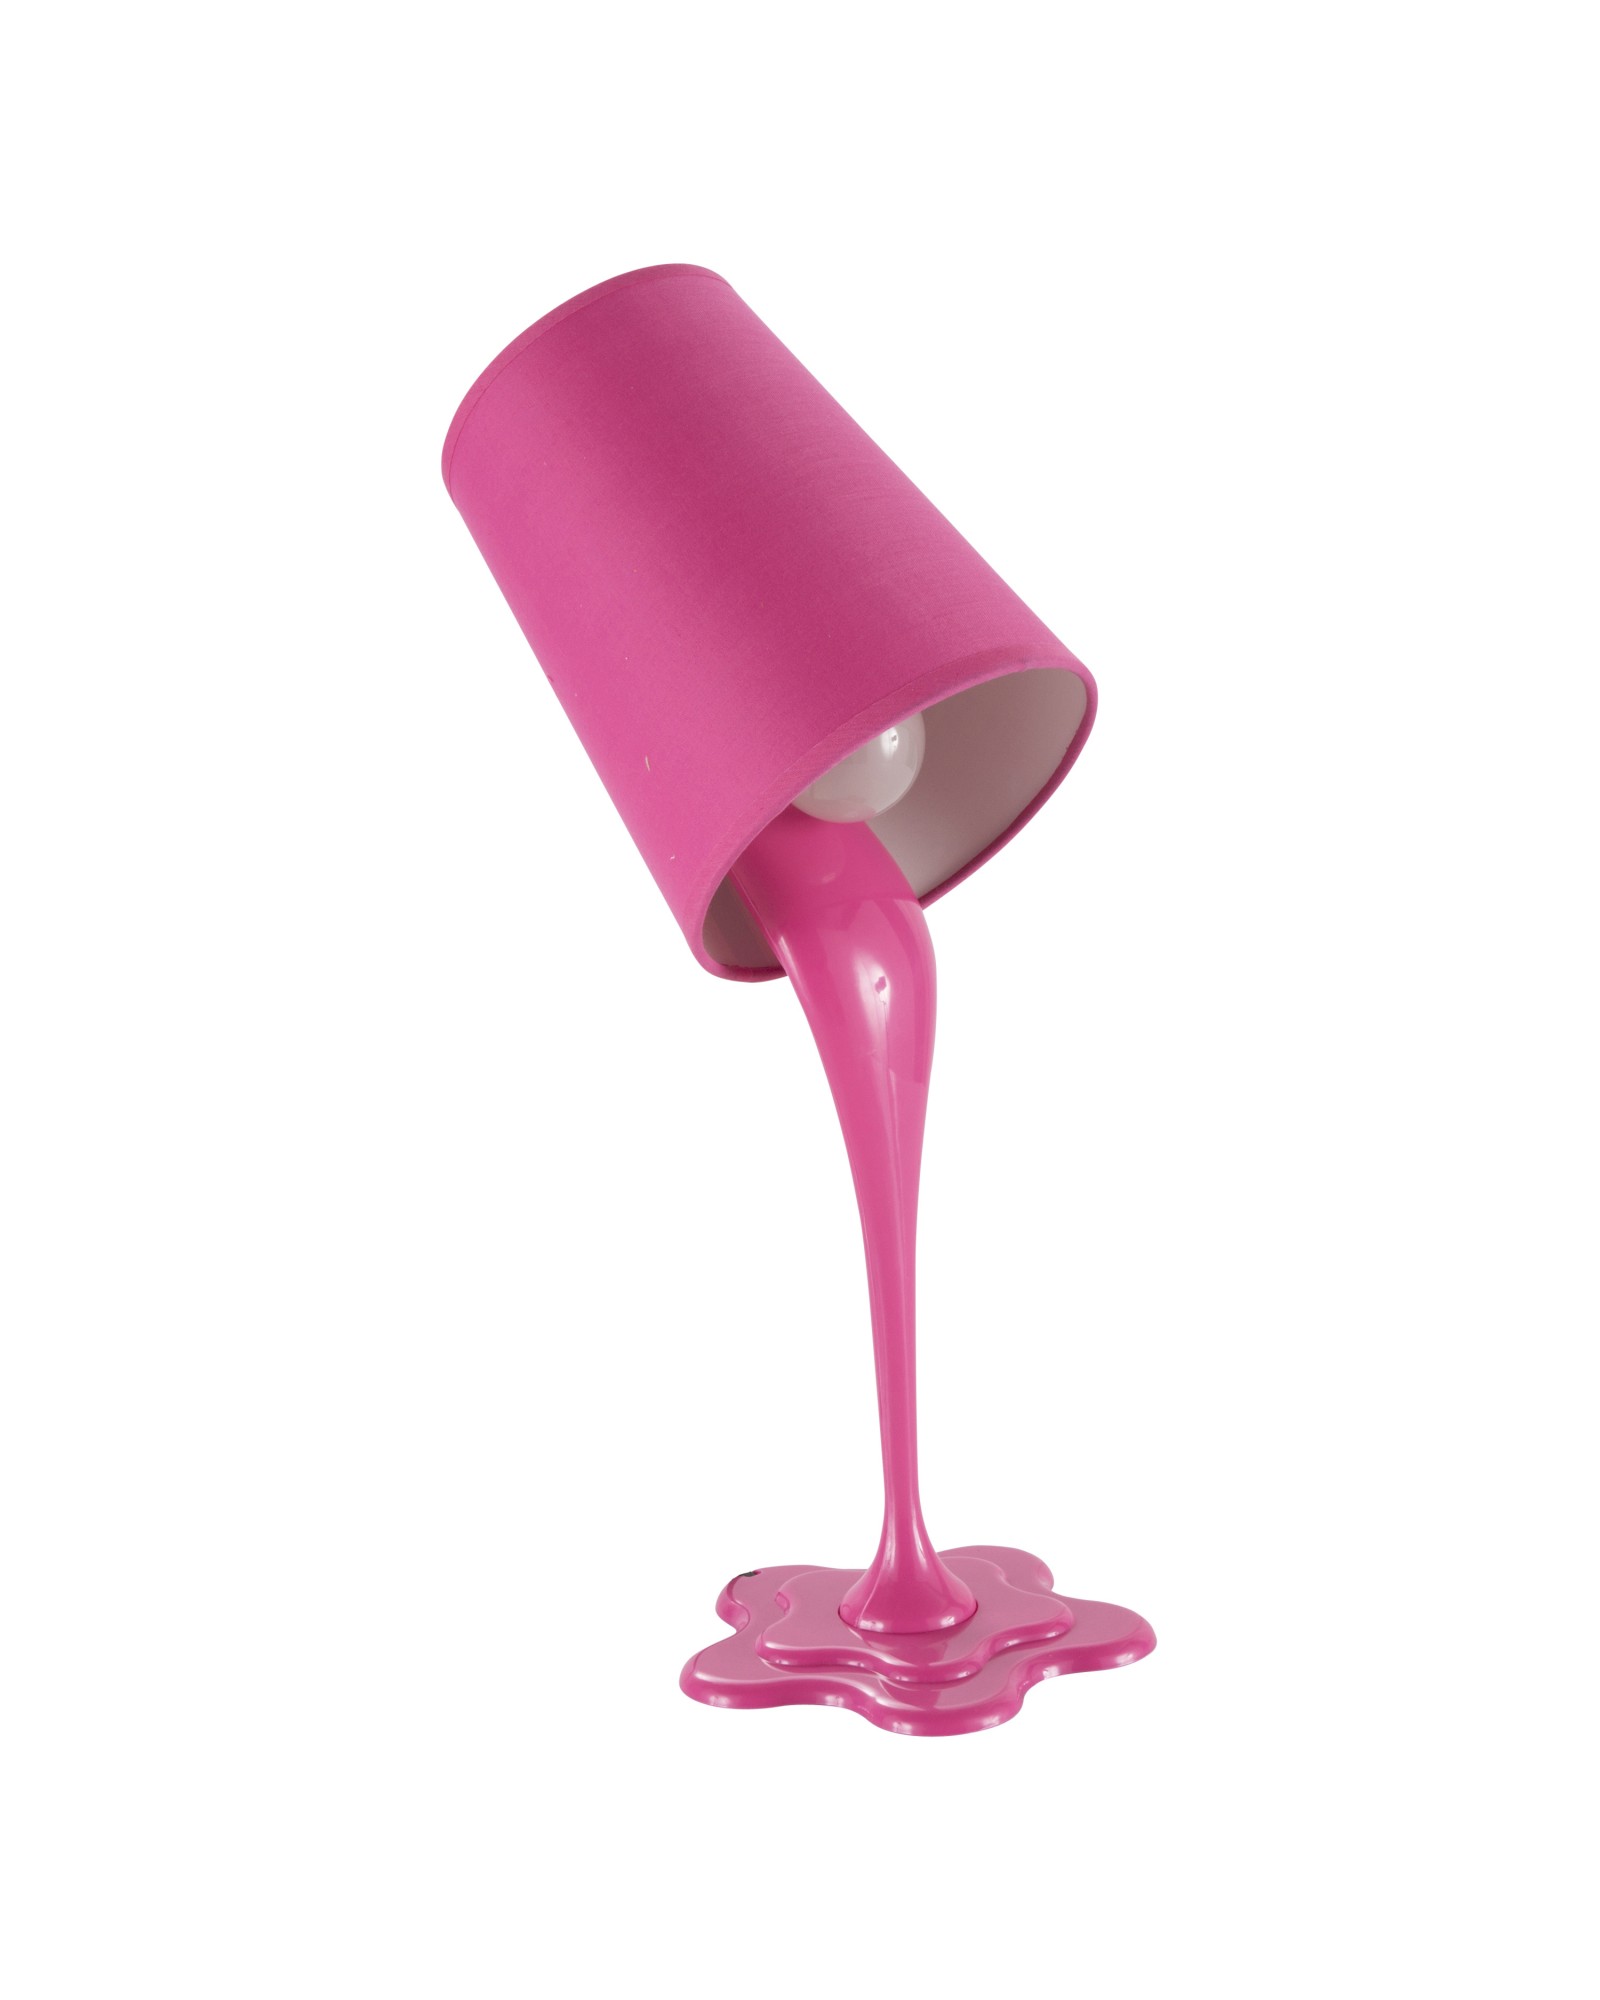 Woopsy Modern Table Lamp in Hot Pink